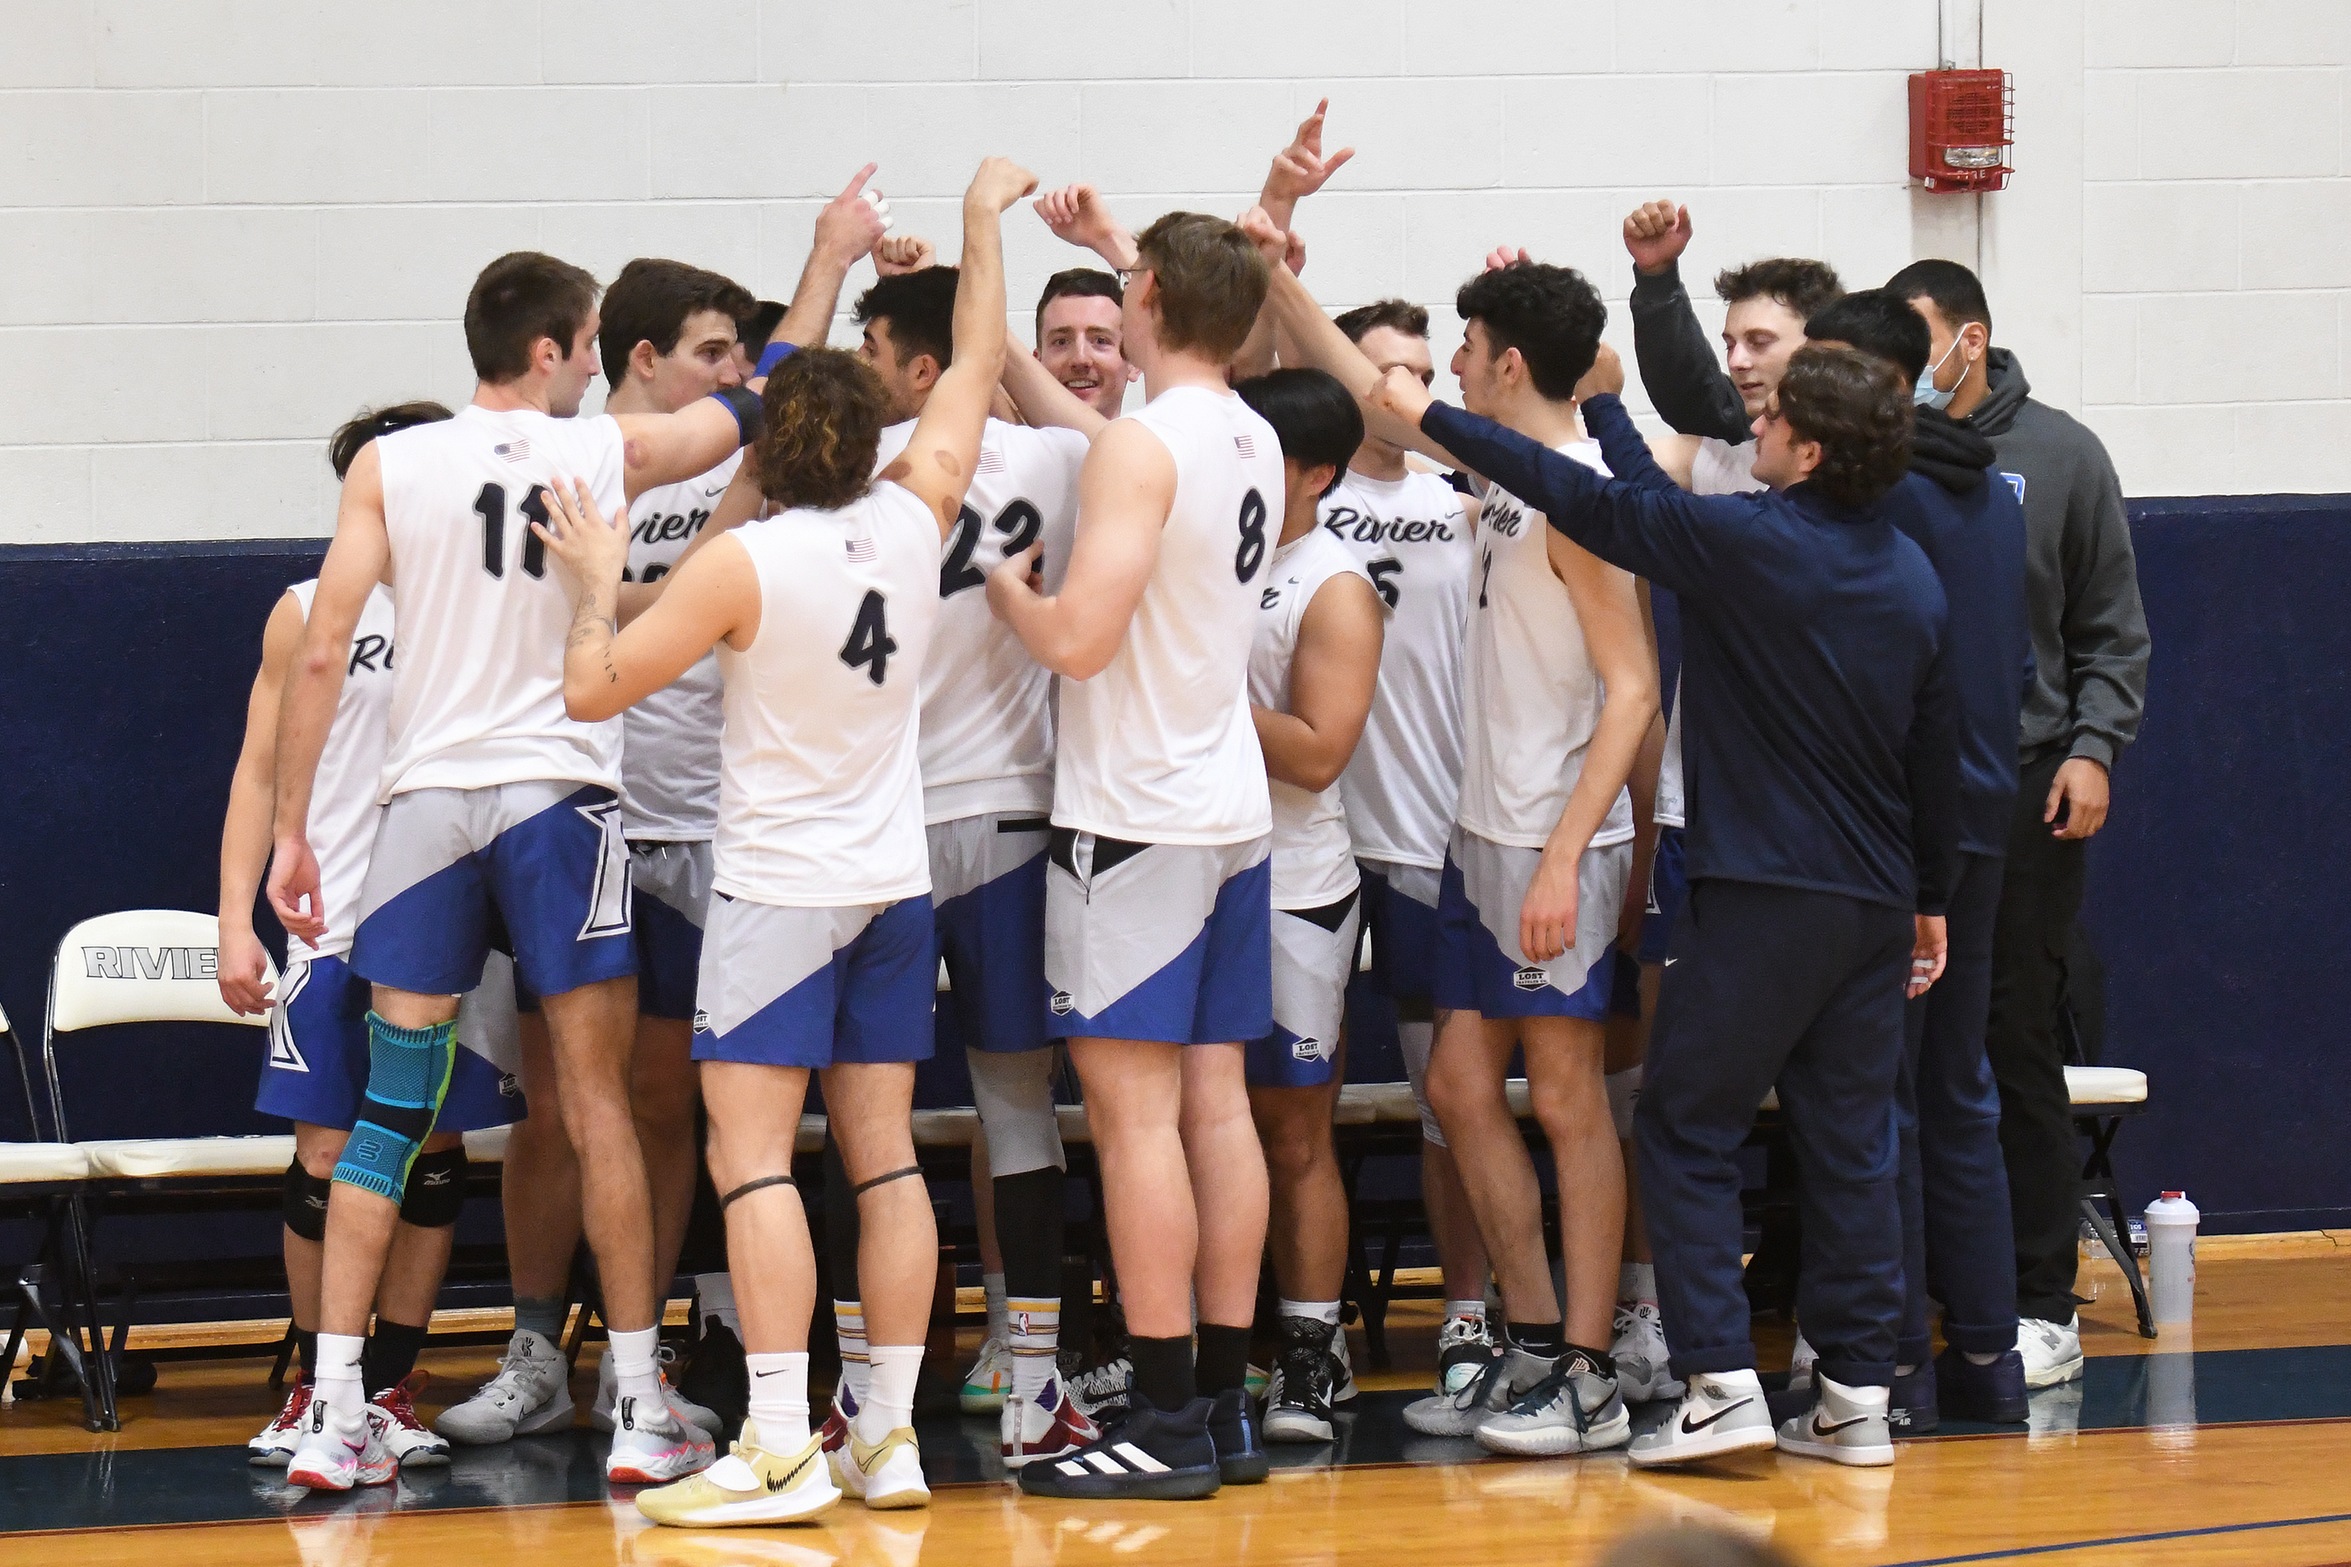 Springfield Downs Men’s Volleyball